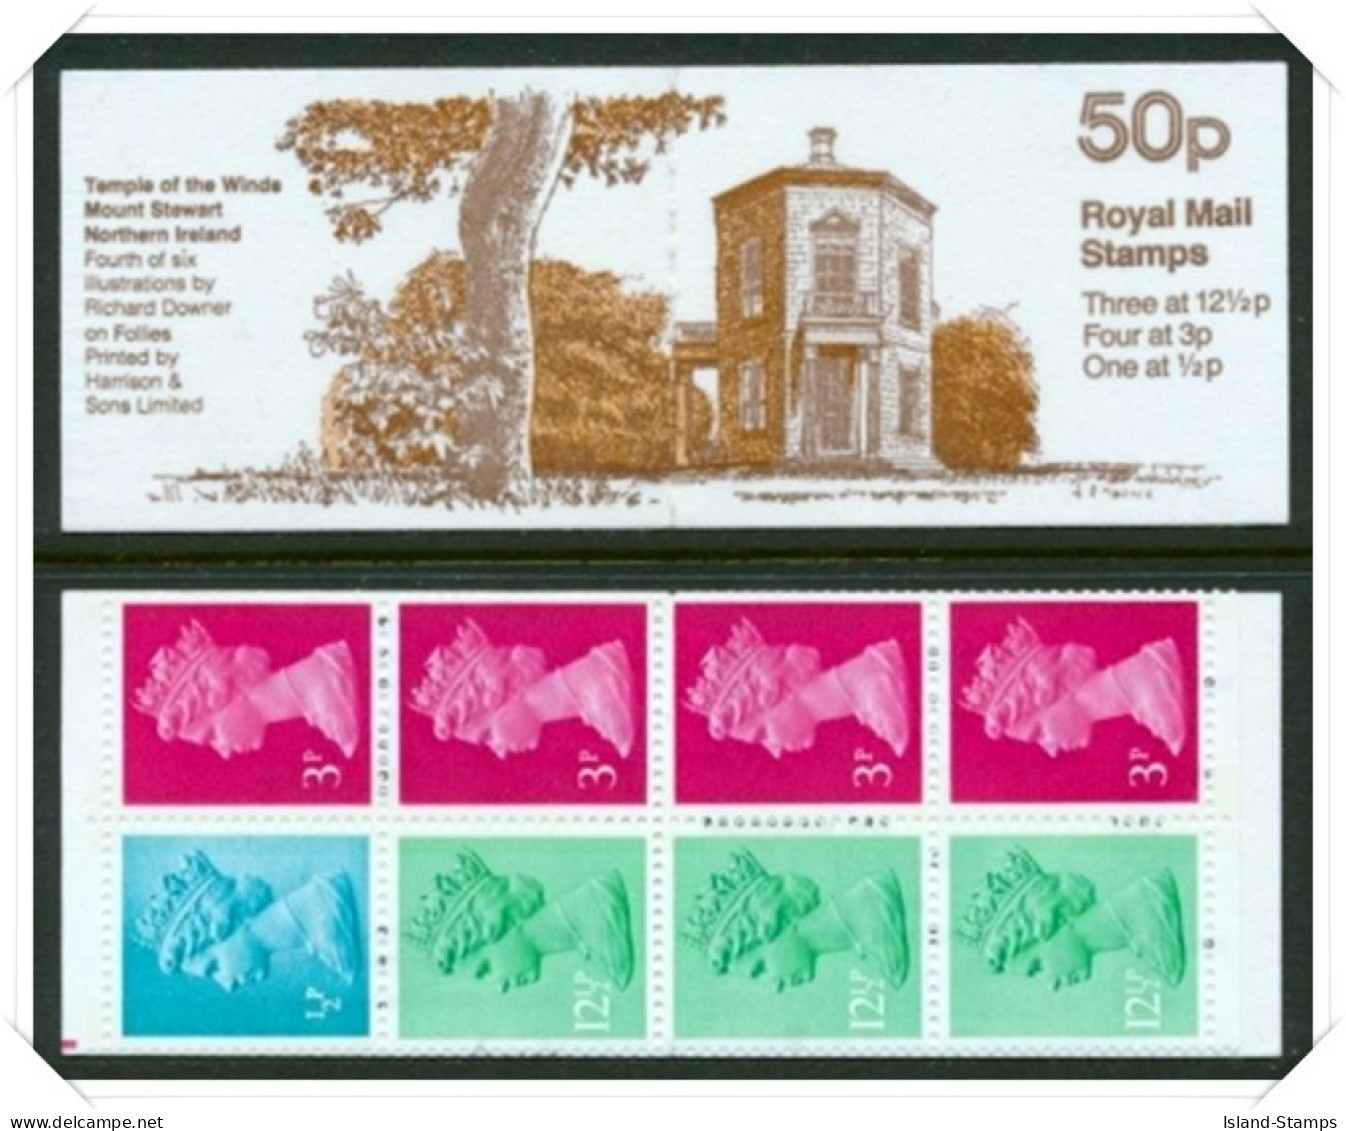 FB20a Follies Series No 4 Temple Of The Winds (50p Folded Booklets) NB1-4 - Booklets